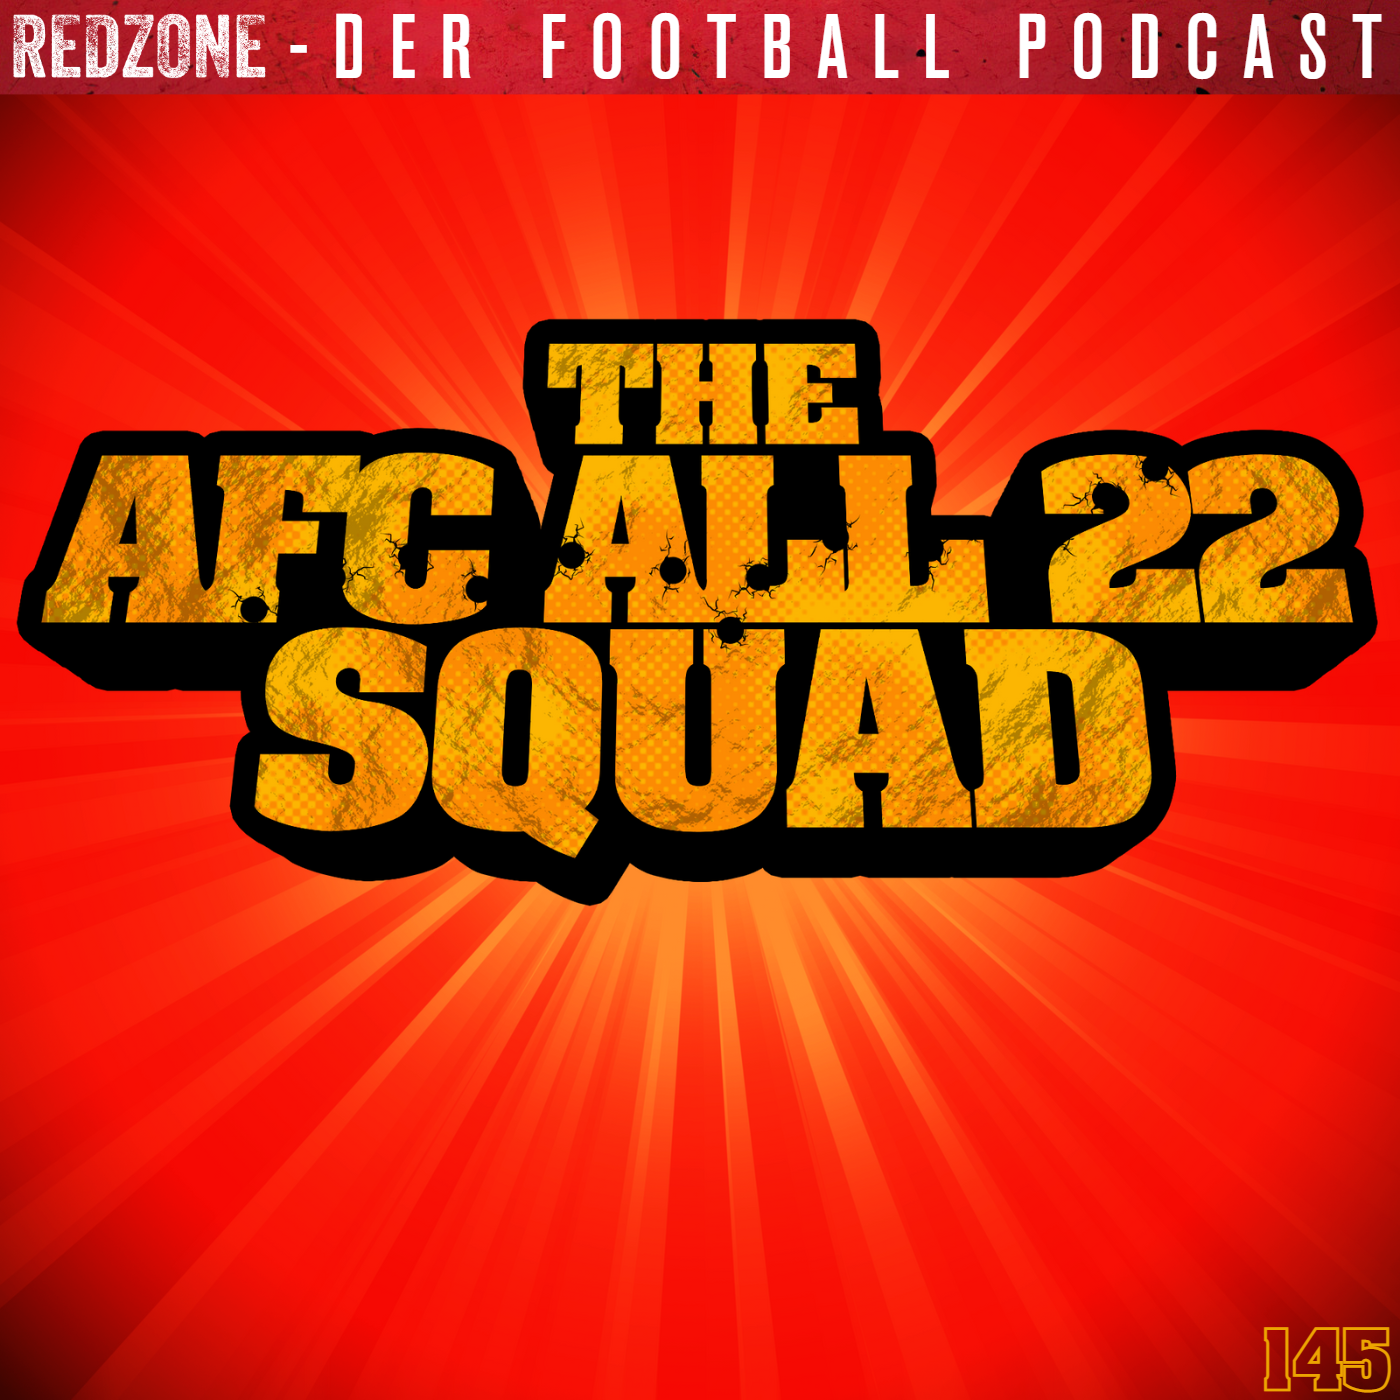 AFC All-22 Squad (EP 145)